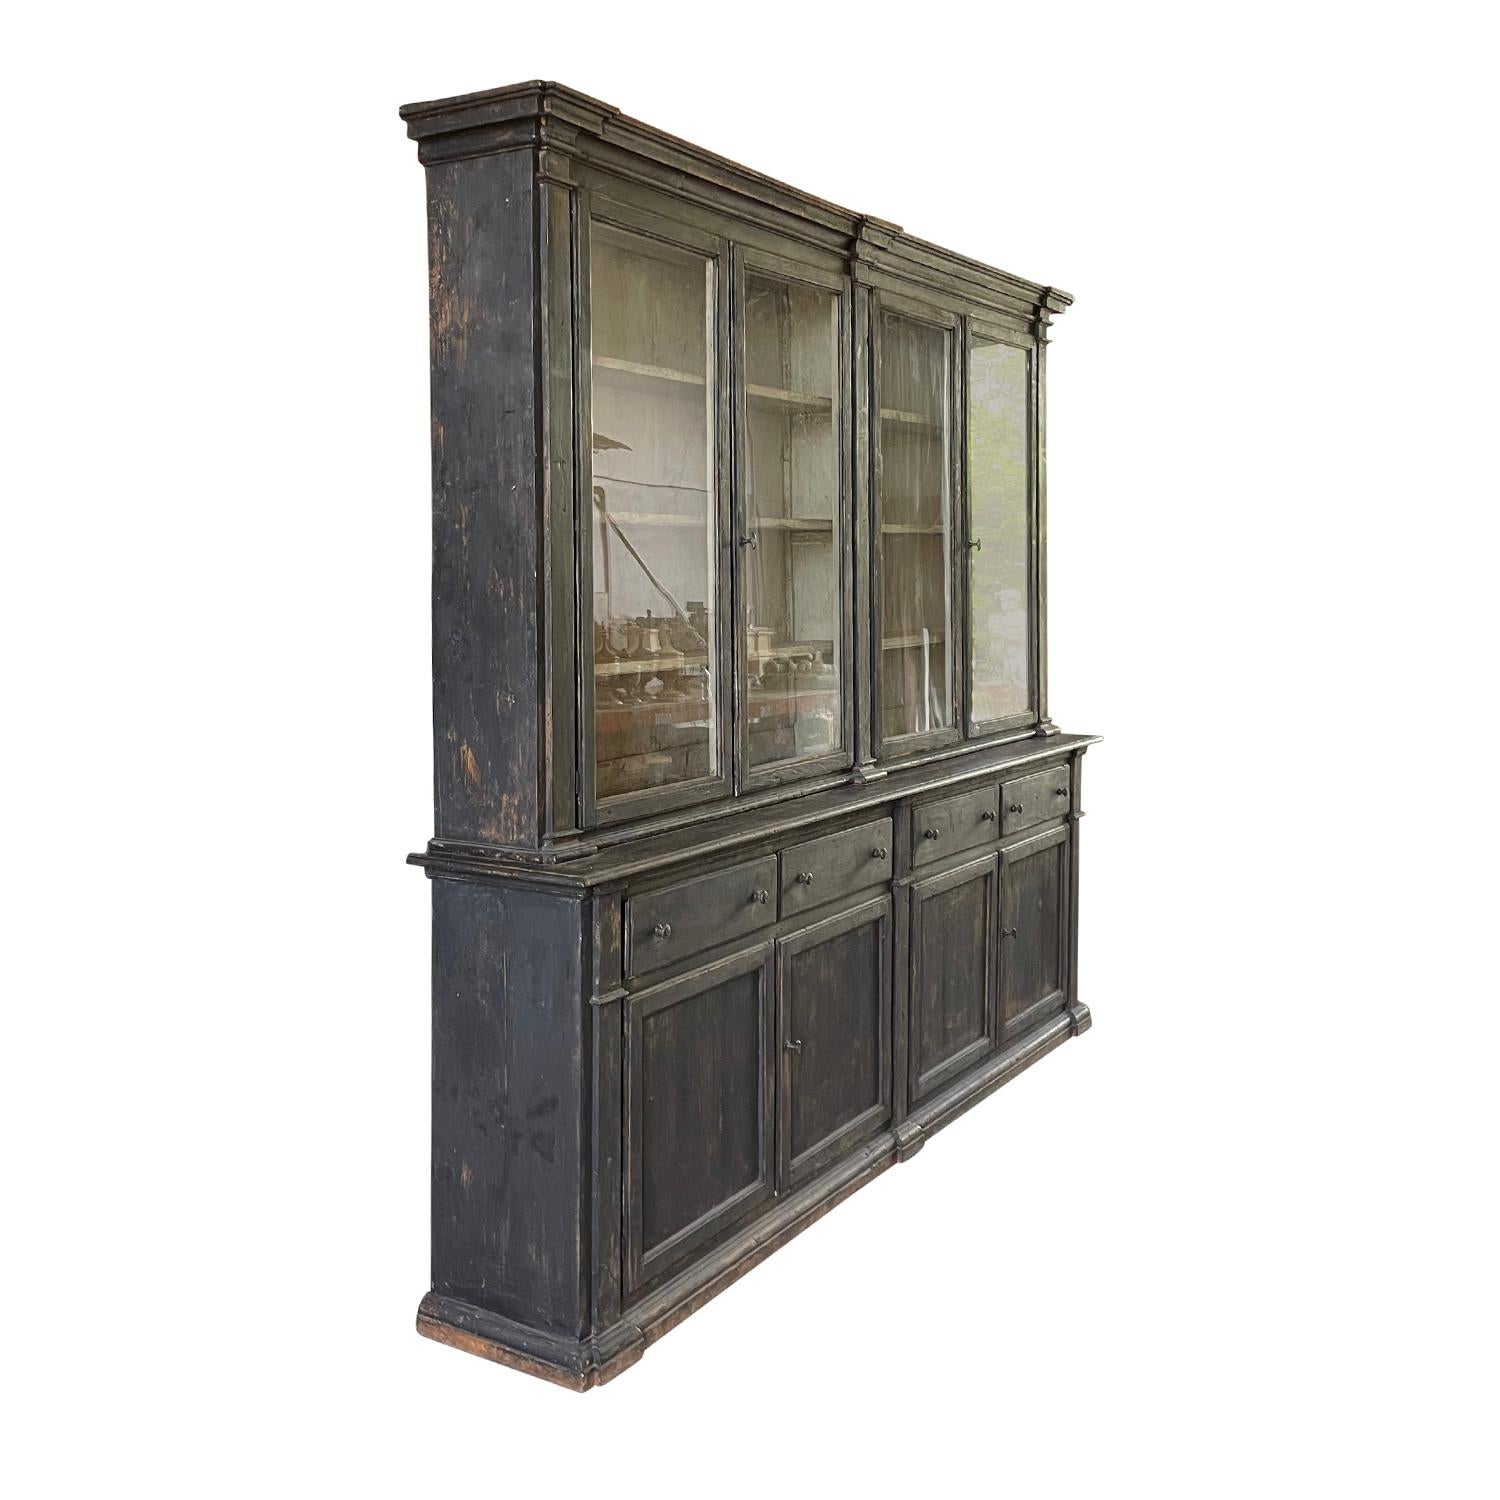 An antique French 19th Century large two-part library or meuble a deux corps anthracite black patinated, made of hand crafted Pinewood. The Provincial armoire has an ecru colored interior and simple lines. The lower part has double doors and four